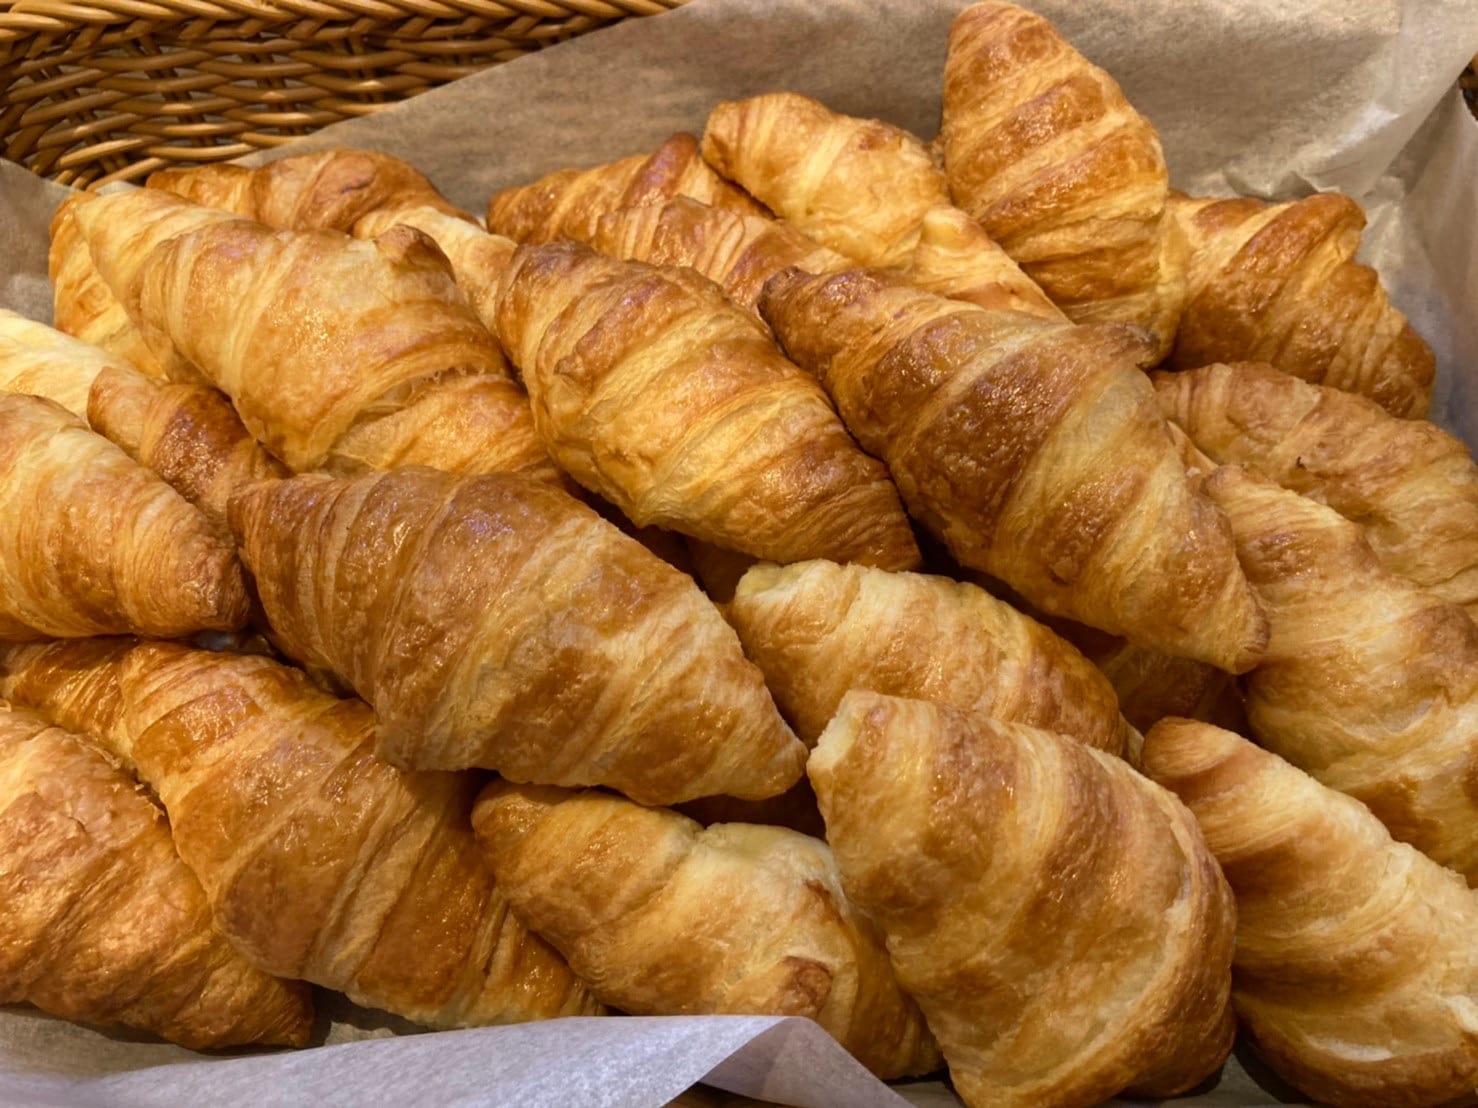 Freshly baked croissants ◆ You can enjoy it at breakfast buffet.